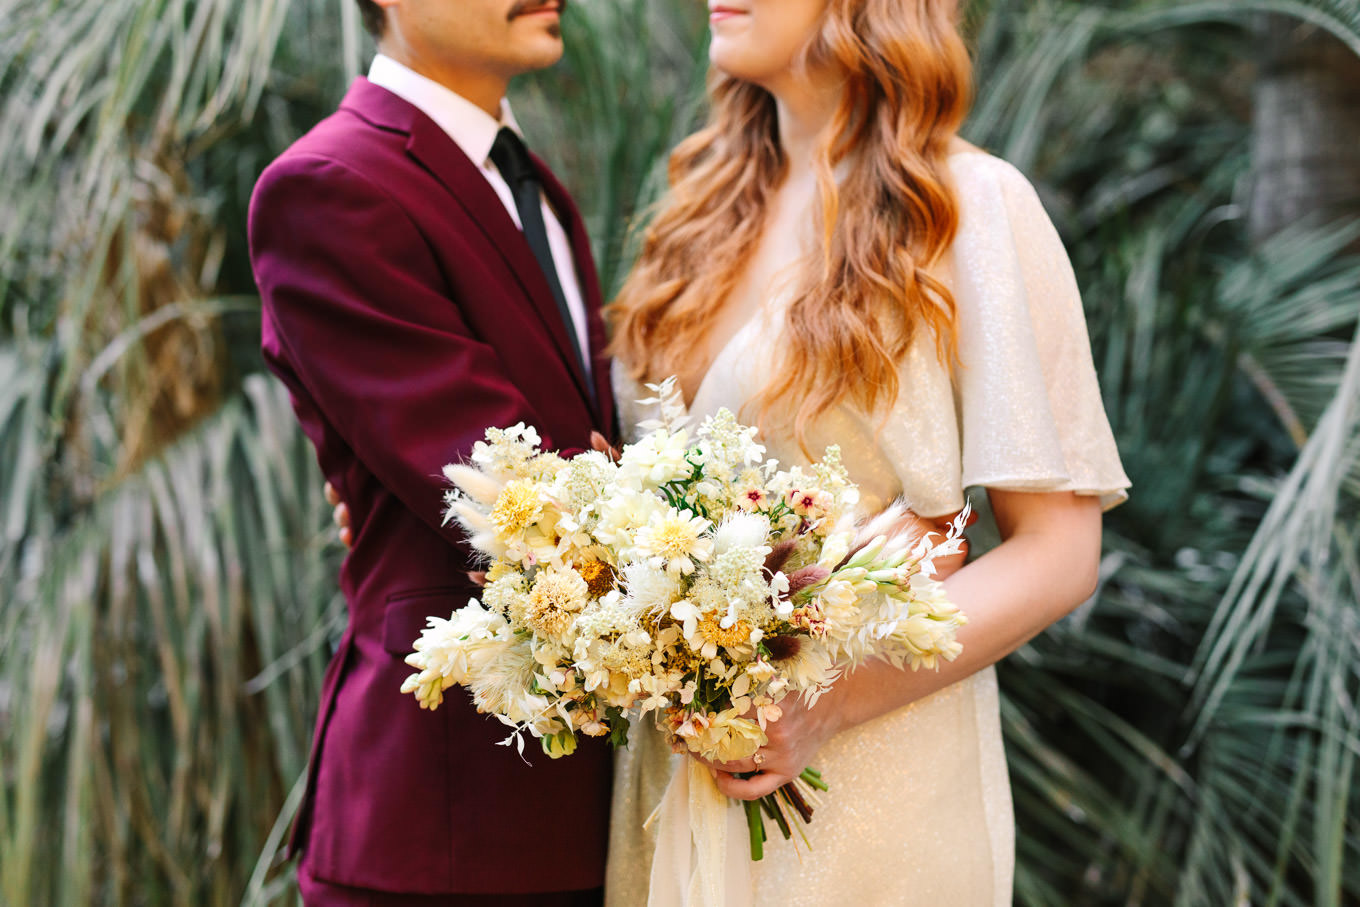 Boho wedding bouquet | Los Angeles Arboretum Elopement | Colorful and elevated wedding photography for fun-loving couples in Southern California | #LosAngelesElopement #elopement #LAarboretum #LAskyline #elopementphotos   Source: Mary Costa Photography | Los Angeles